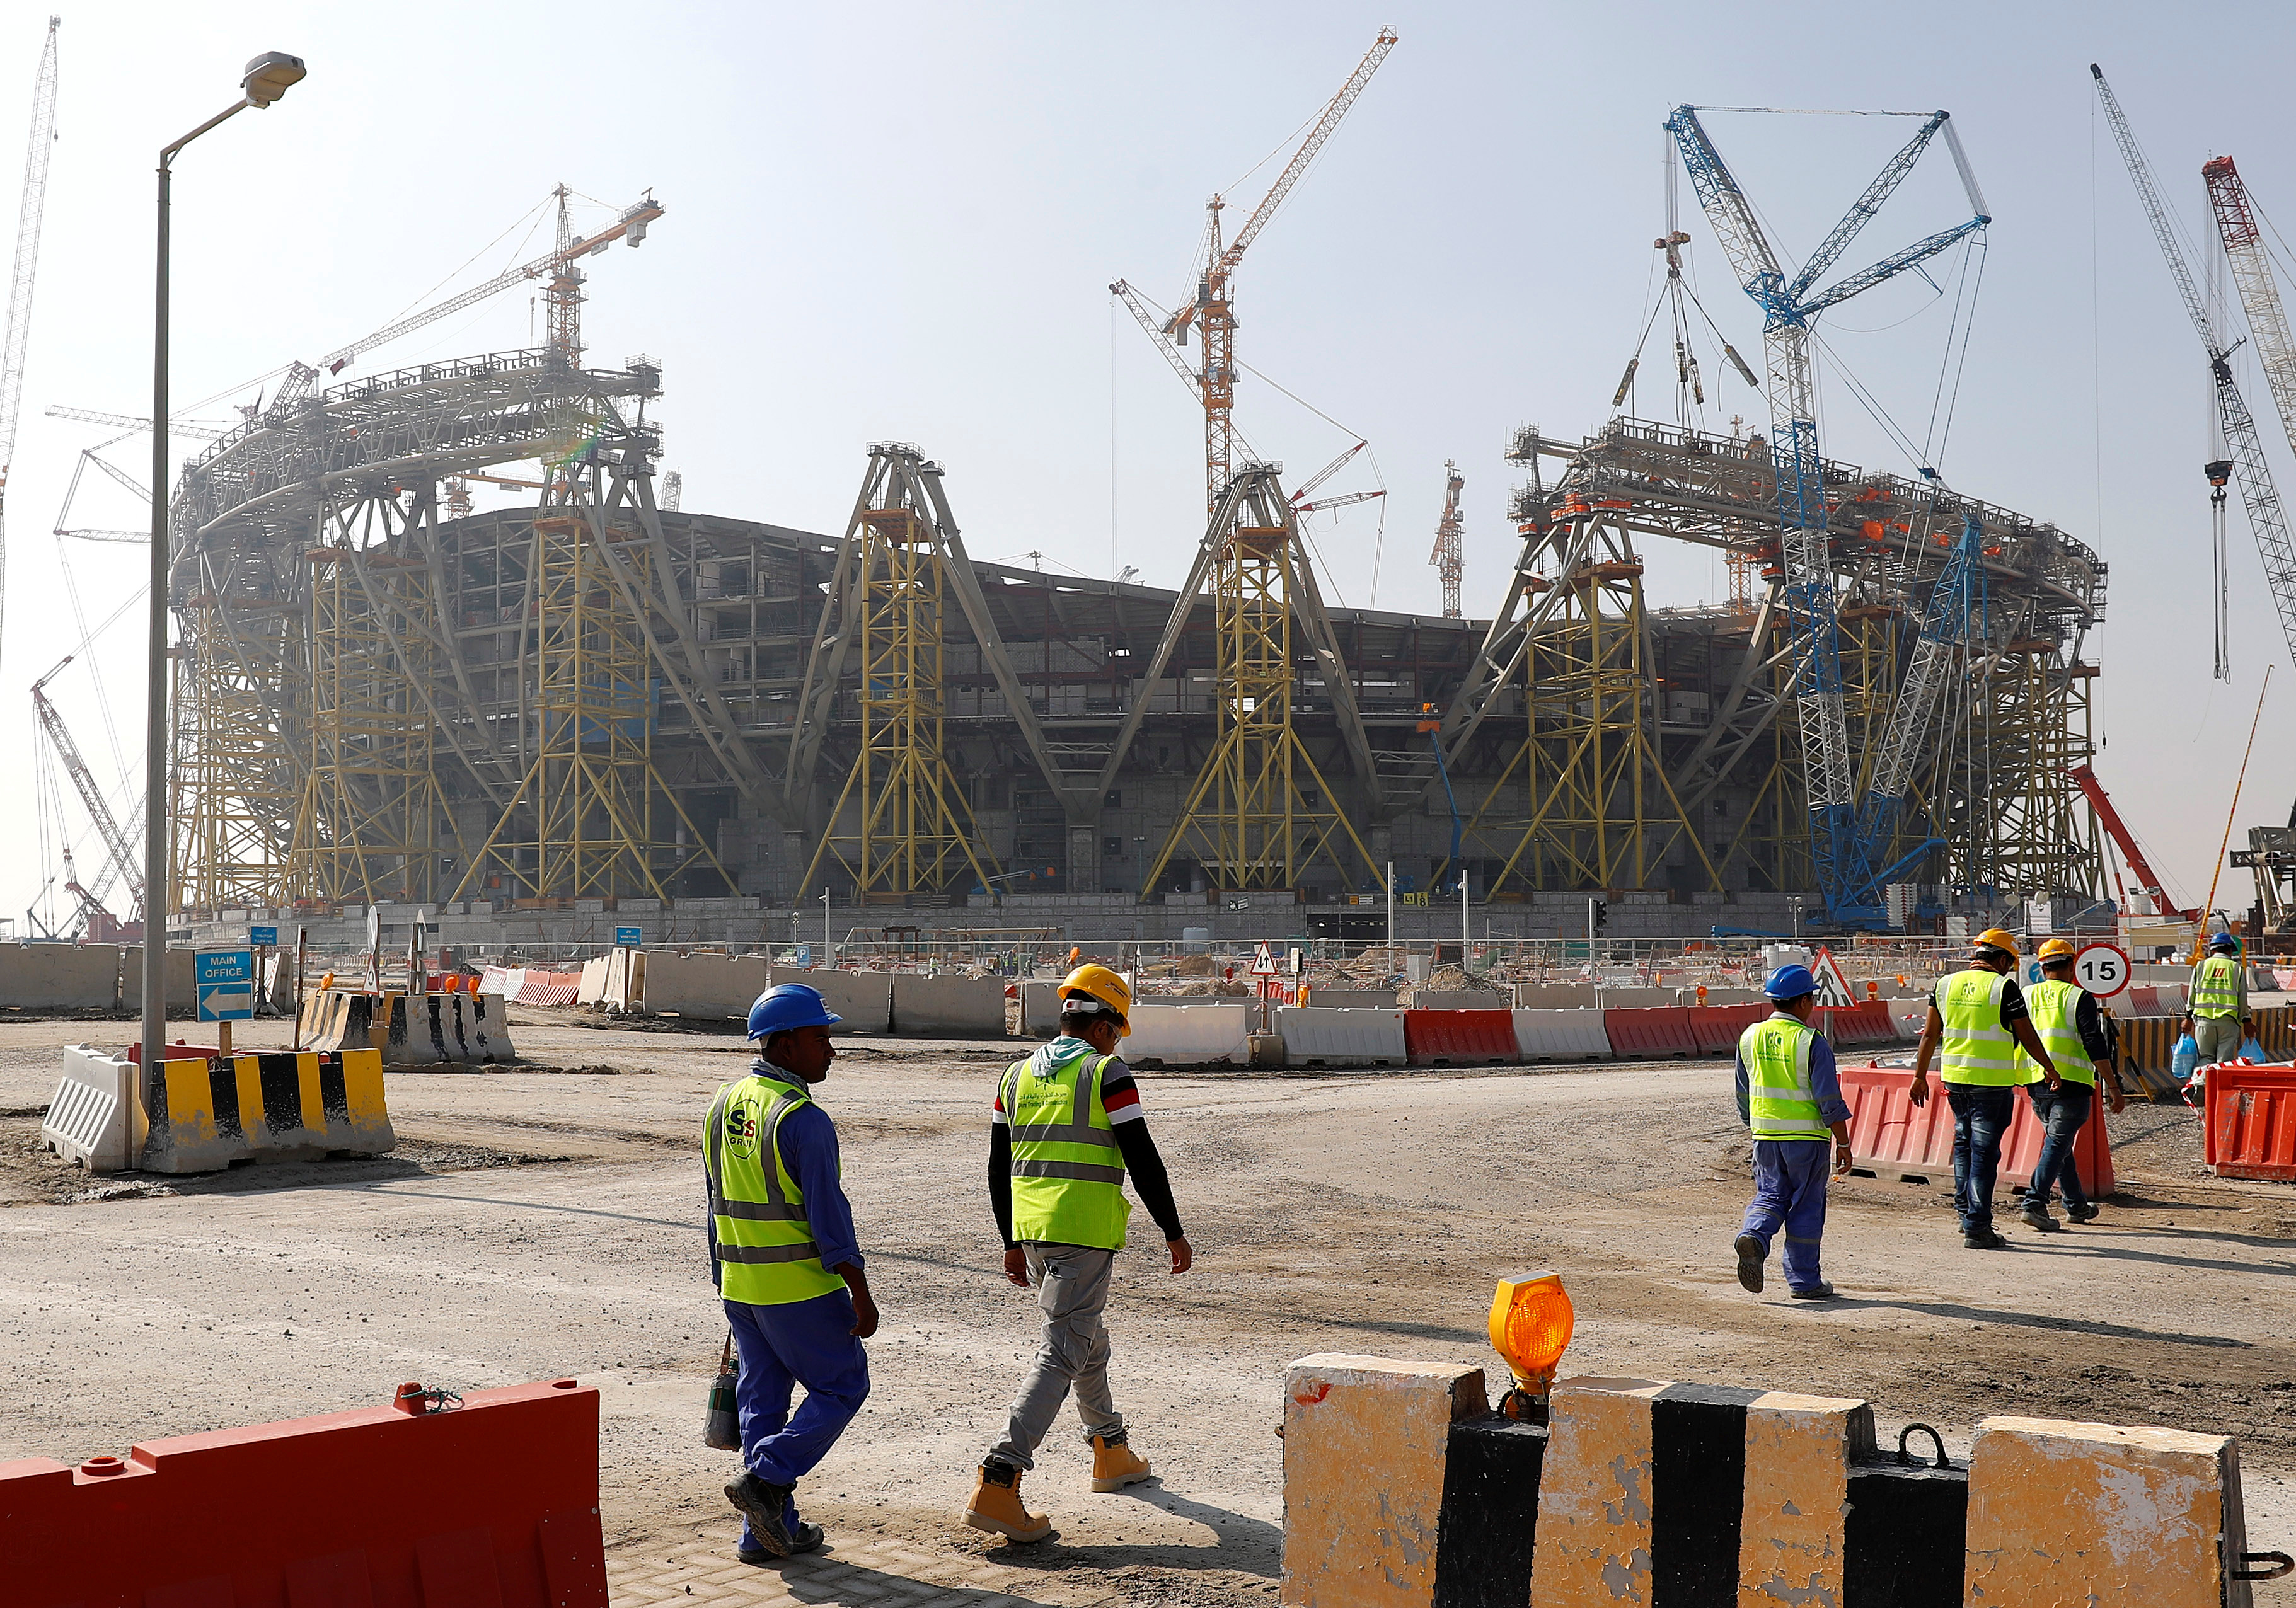 Workers in Qatar building a stadium ahead of the 2022 World Cup (Reuters)